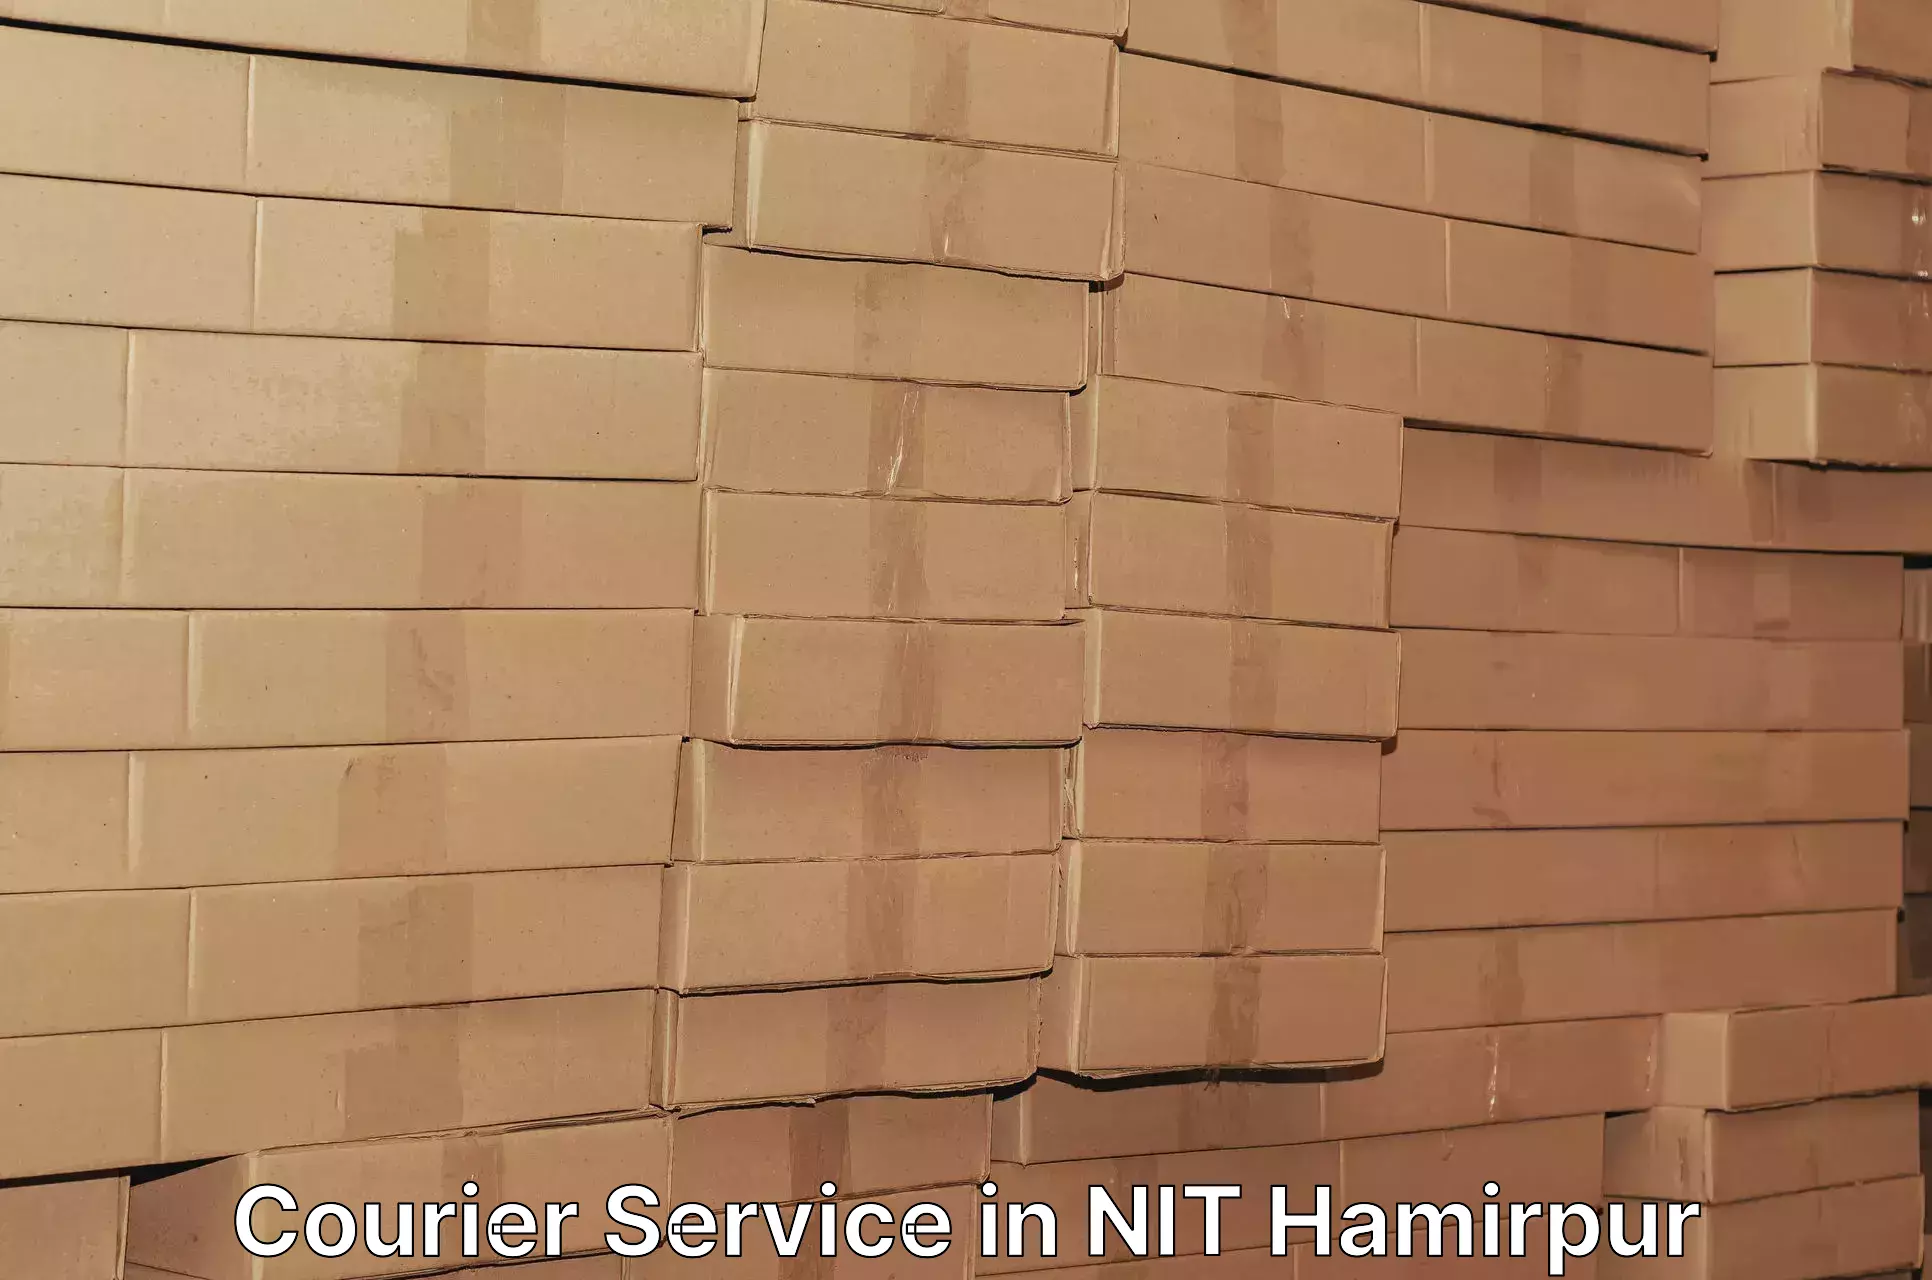 Air courier services in NIT Hamirpur